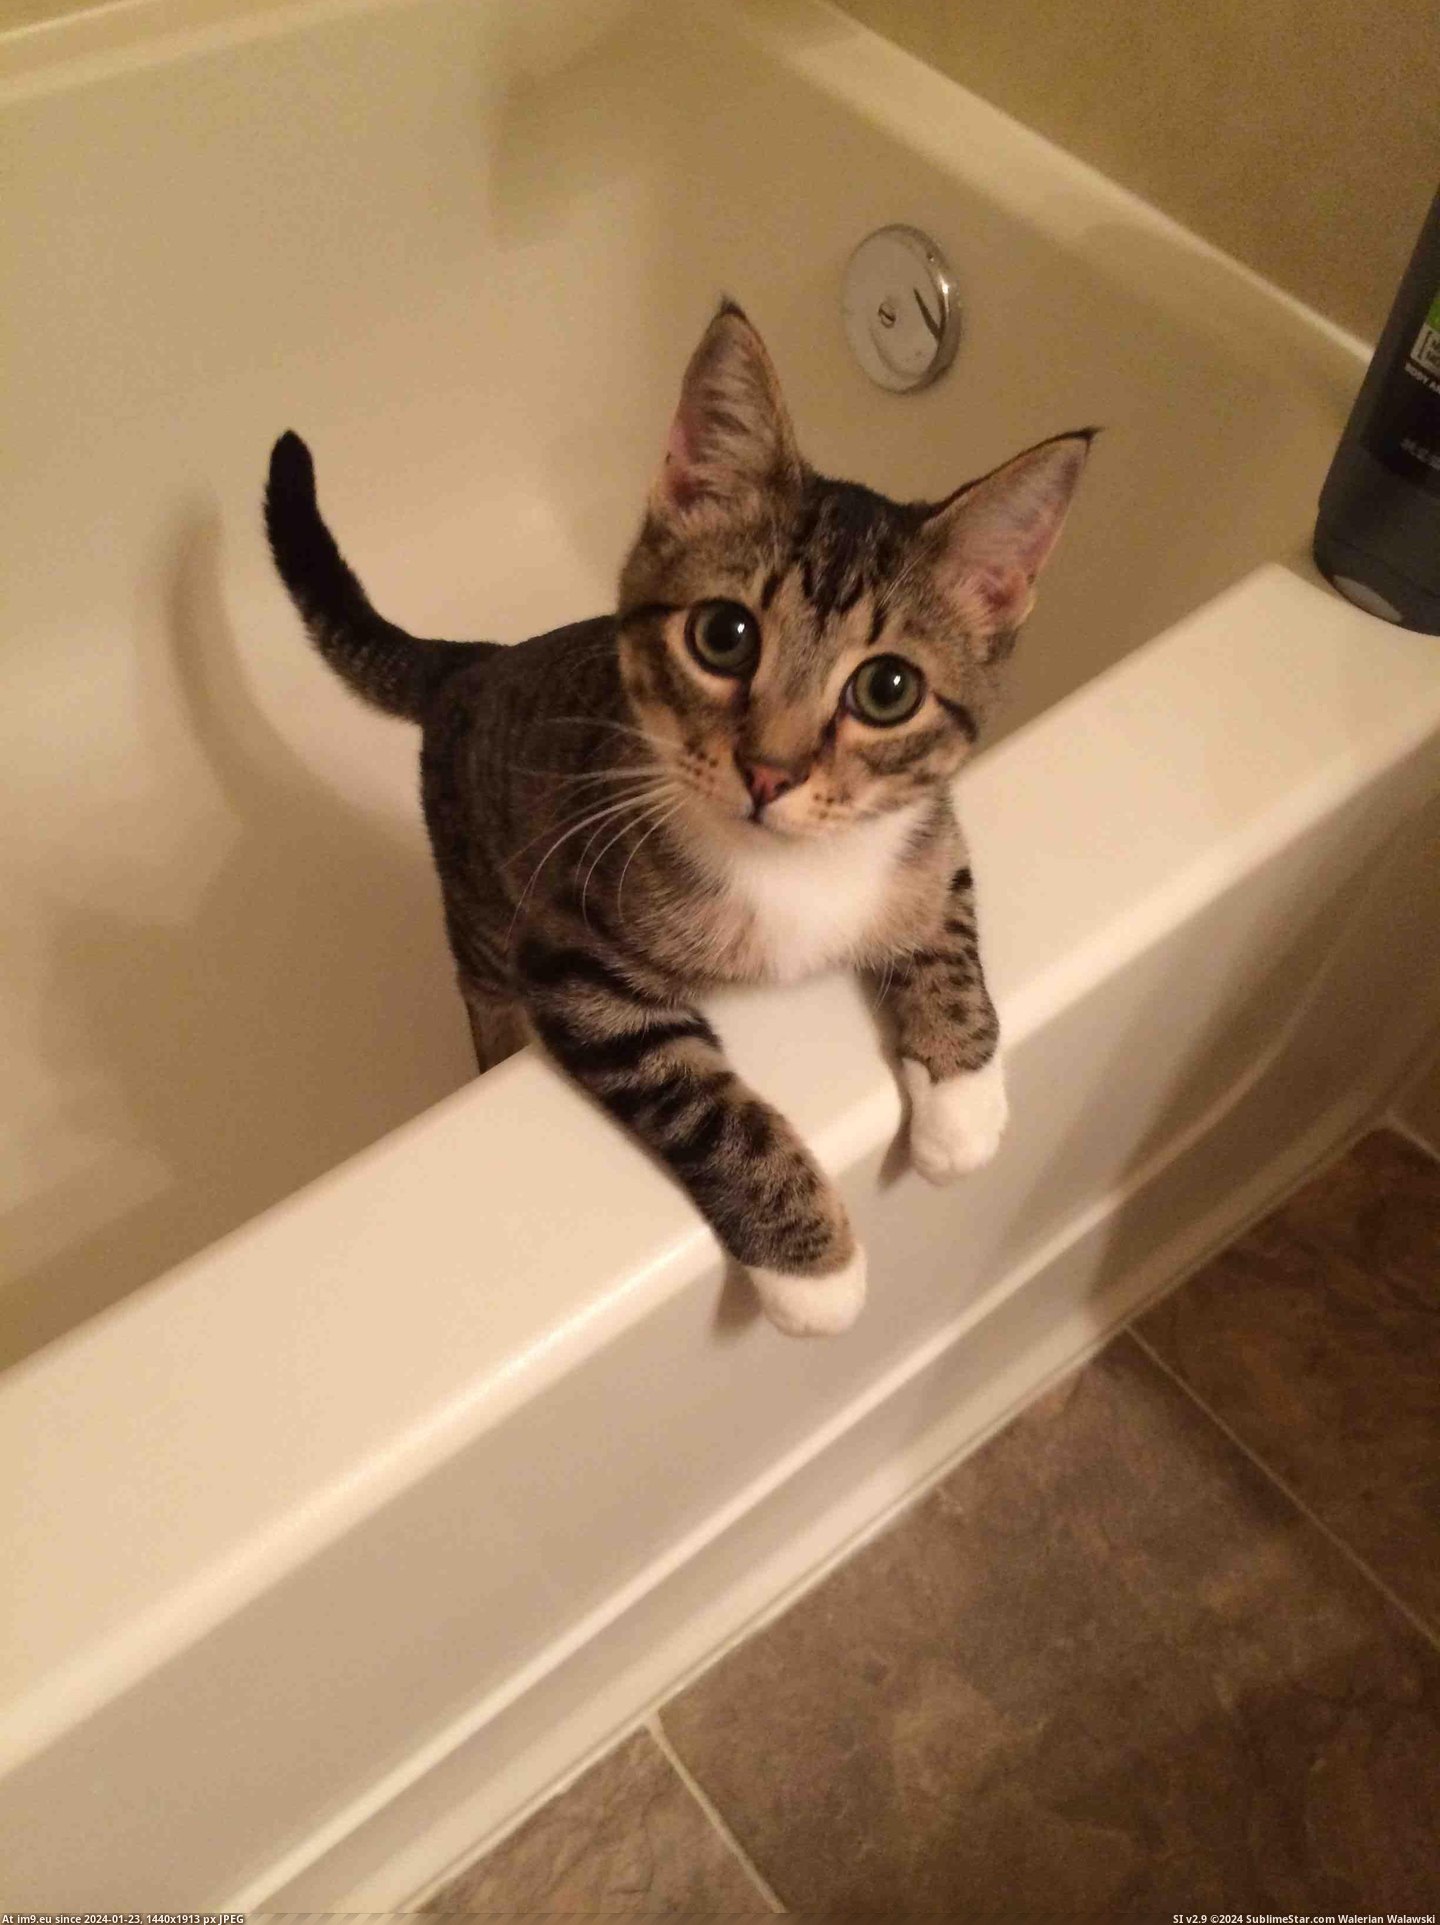 #Shower #Meet #Lou #Tub #Jumps [Aww] He always jumps into the tub after a shower. Reddit, meet Lou. Pic. (Bild von album My r/AWW favs))